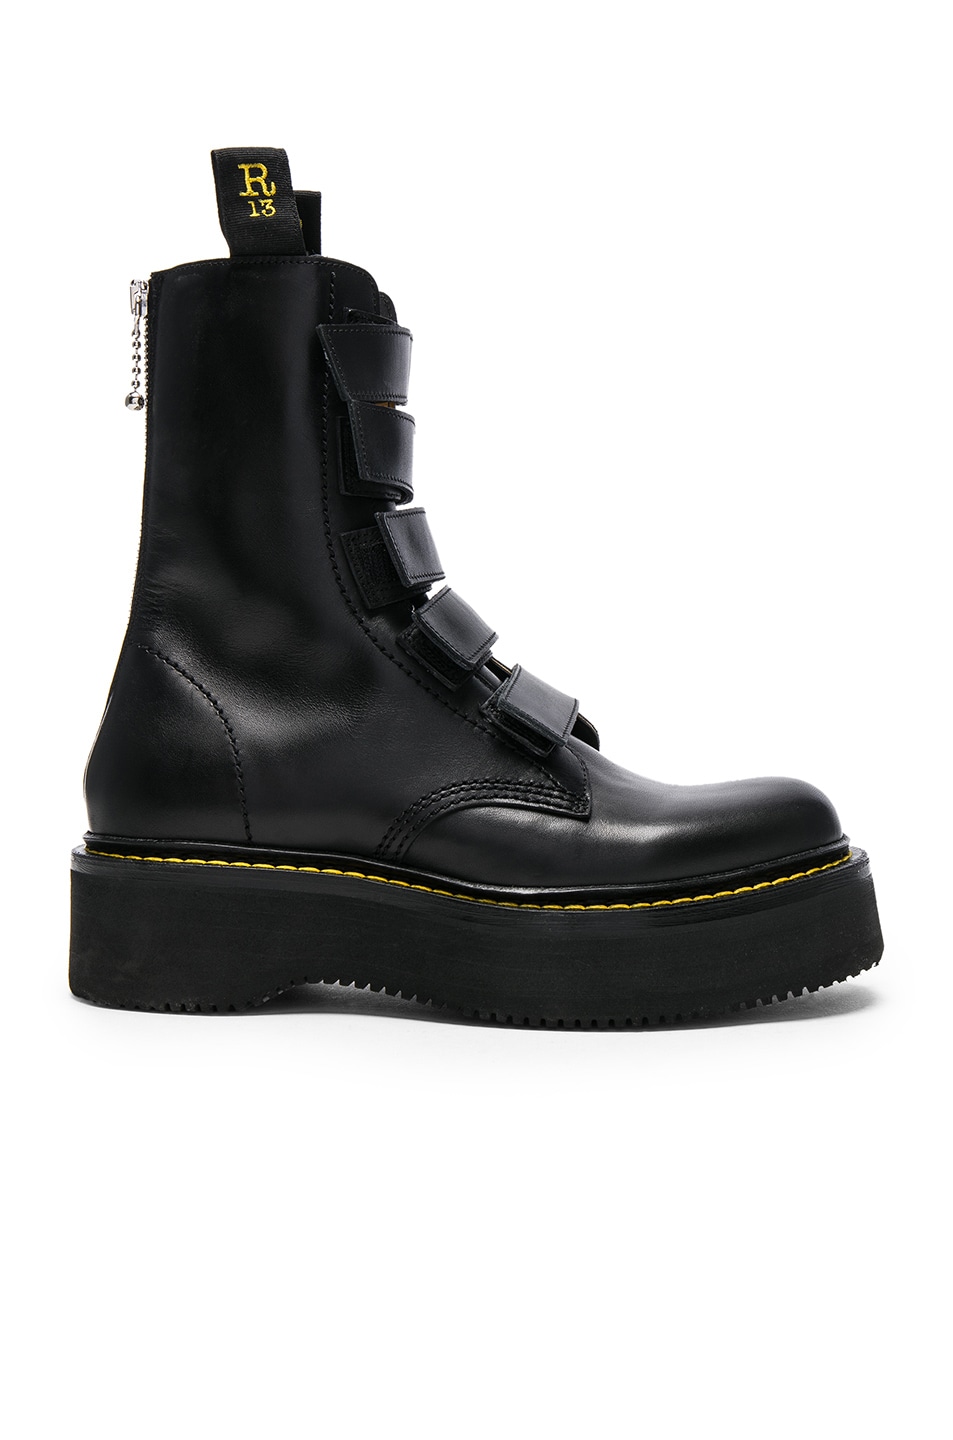 R13 Velcro Stack Boots in Black | FWRD